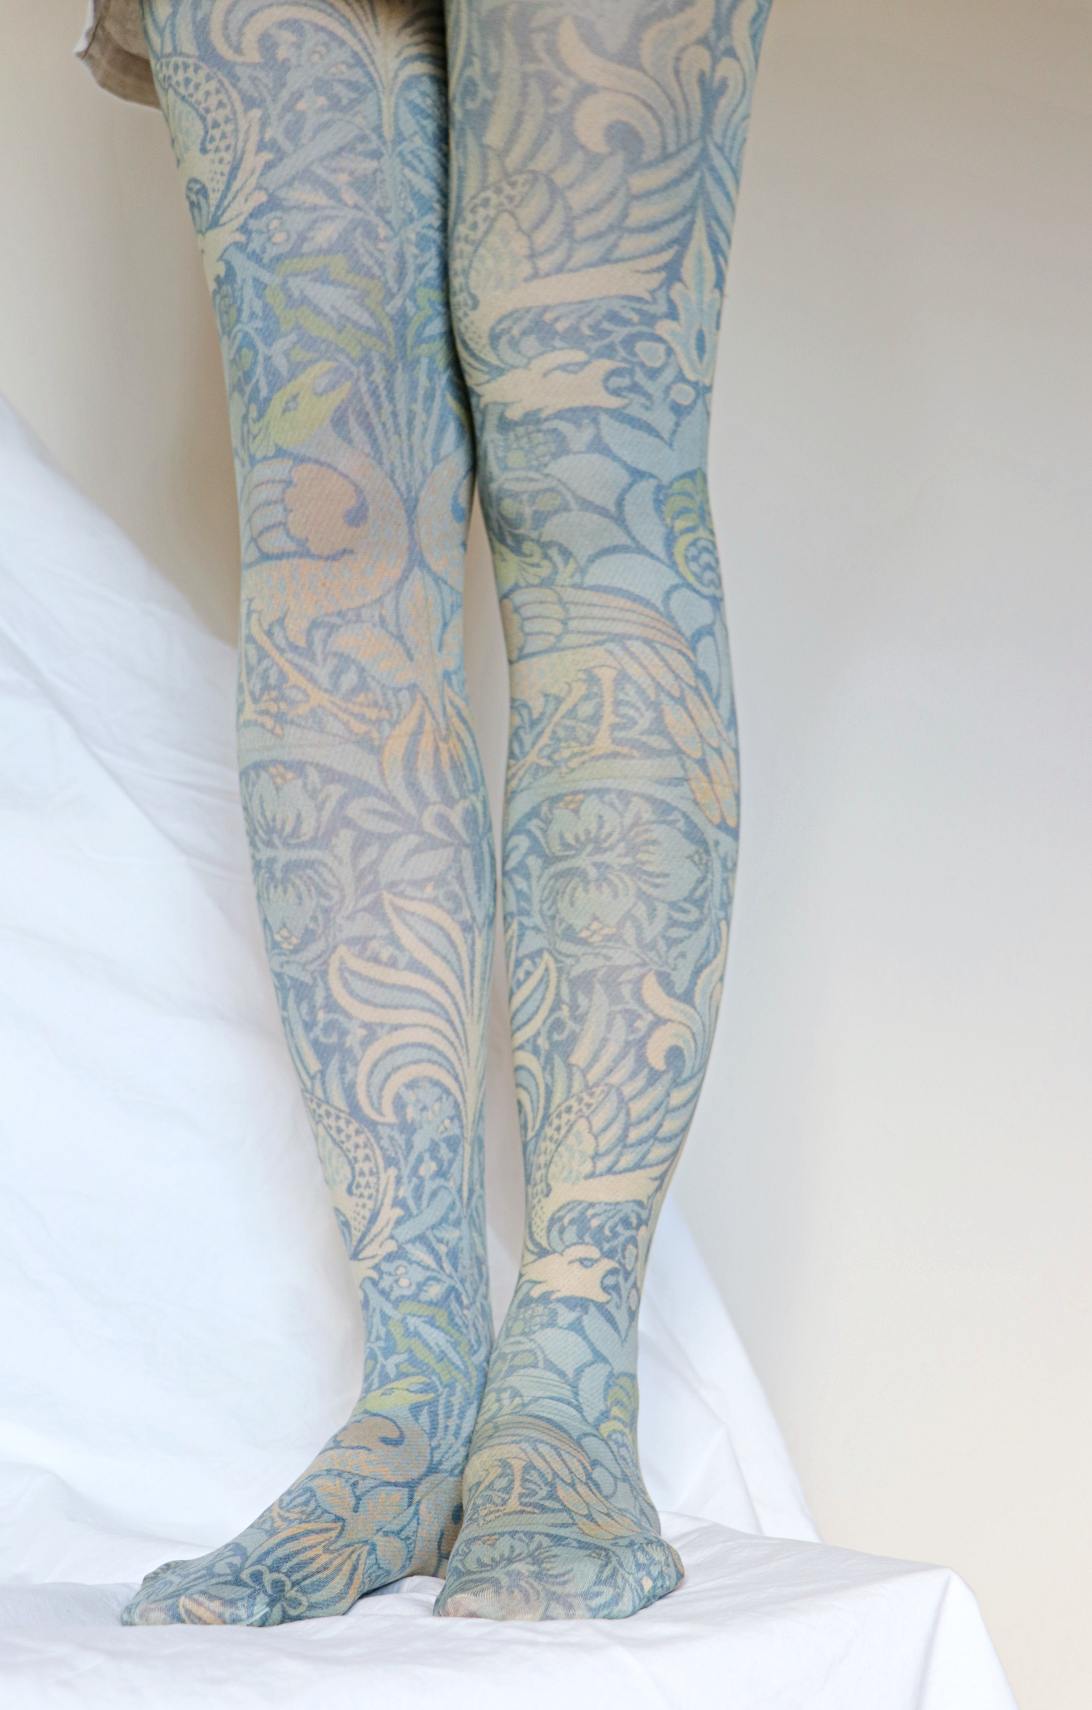 Peacock & Dragon tights from the William Morris collection of the TABBISOCKS brand, with an overall design of peacocks, dragons and plants in an antique blue color